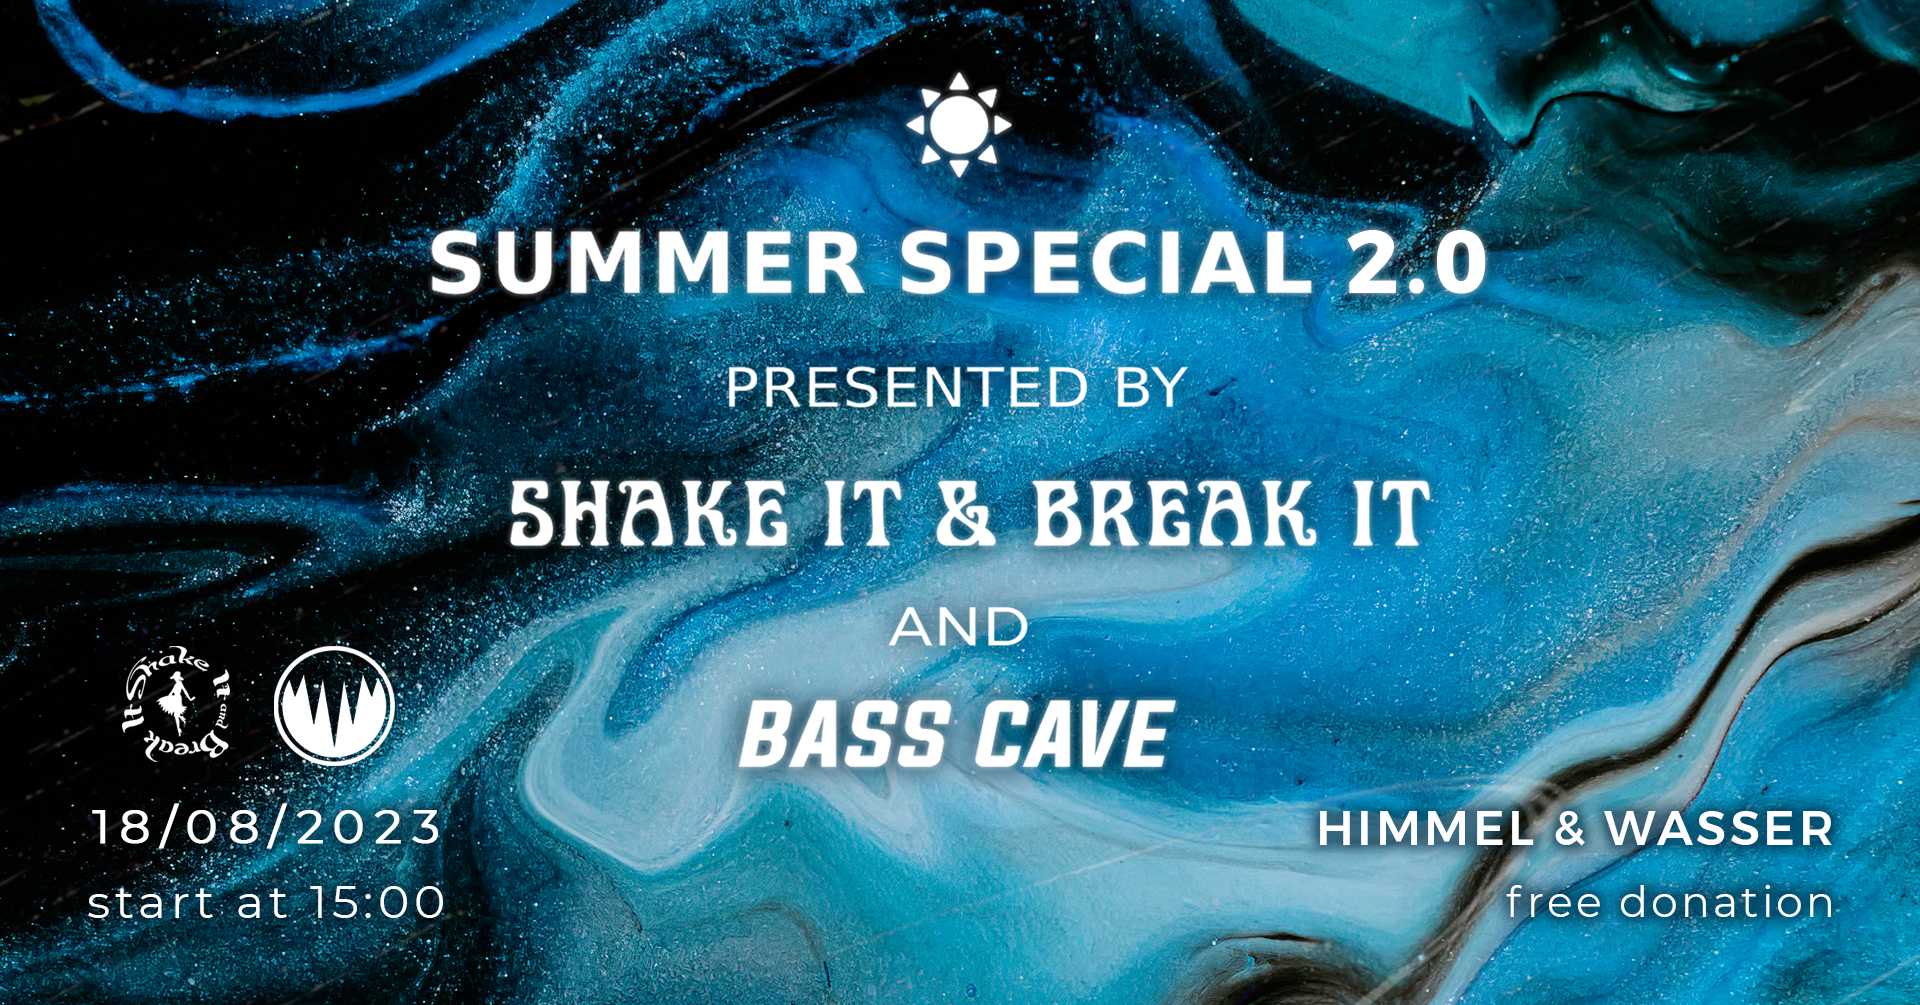 Bass Cave & Shake it and Break it - Summer Special 2.0 am 18. August 2023 @ Donauinsel Wien.